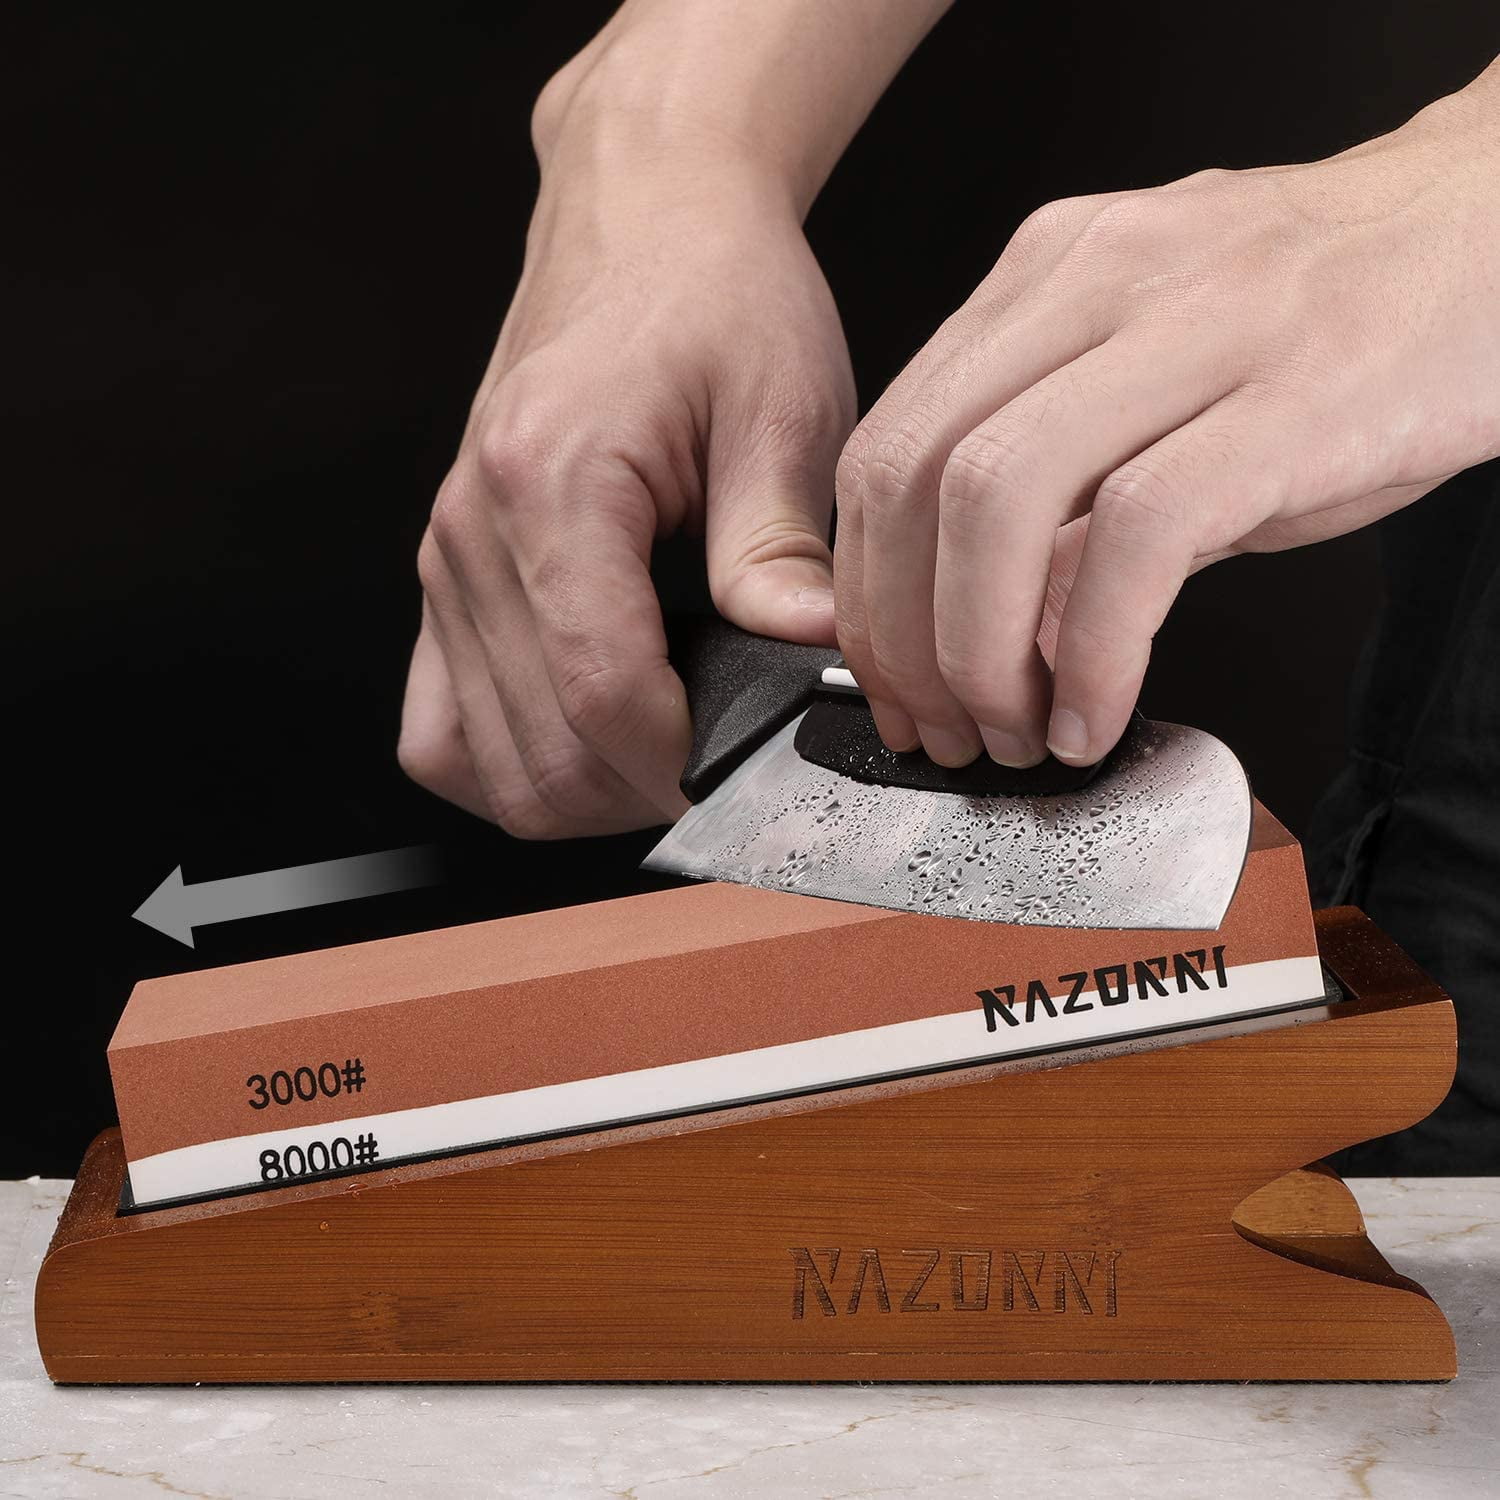 Razorri Solido Angle Guide 2-Double-Sided 400/1000 and 3000/8000 Grit  Whetstones Knife Sharpening Stone Kit with Leather Strop S2 - The Home Depot